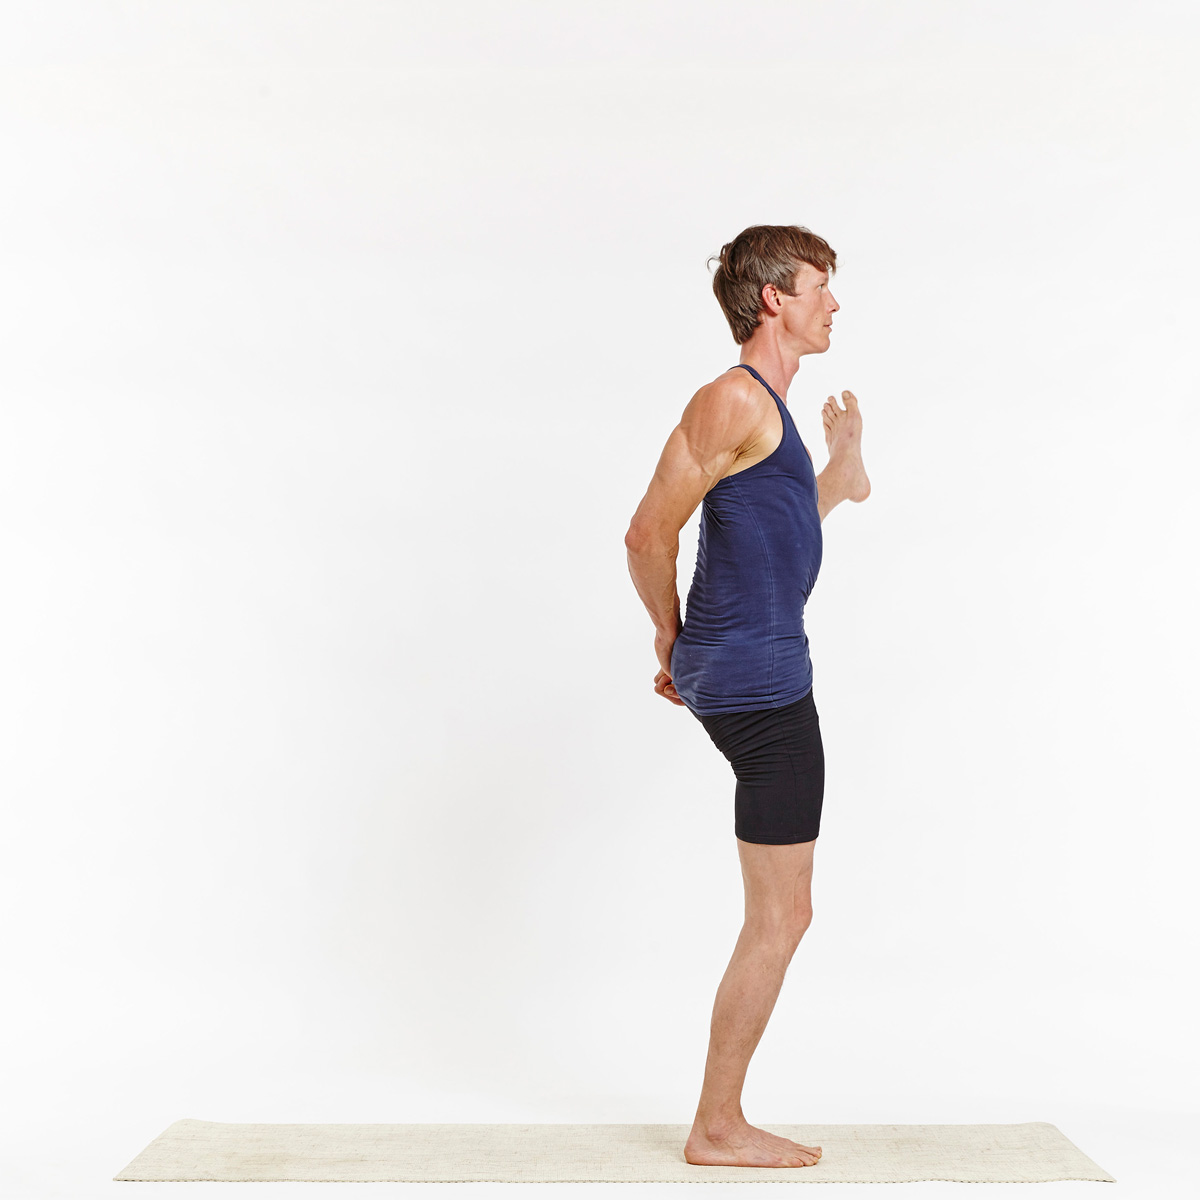 Gluteal Muscle Activation During Common Yoga Poses | Published in  International Journal of Sports Physical Therapy